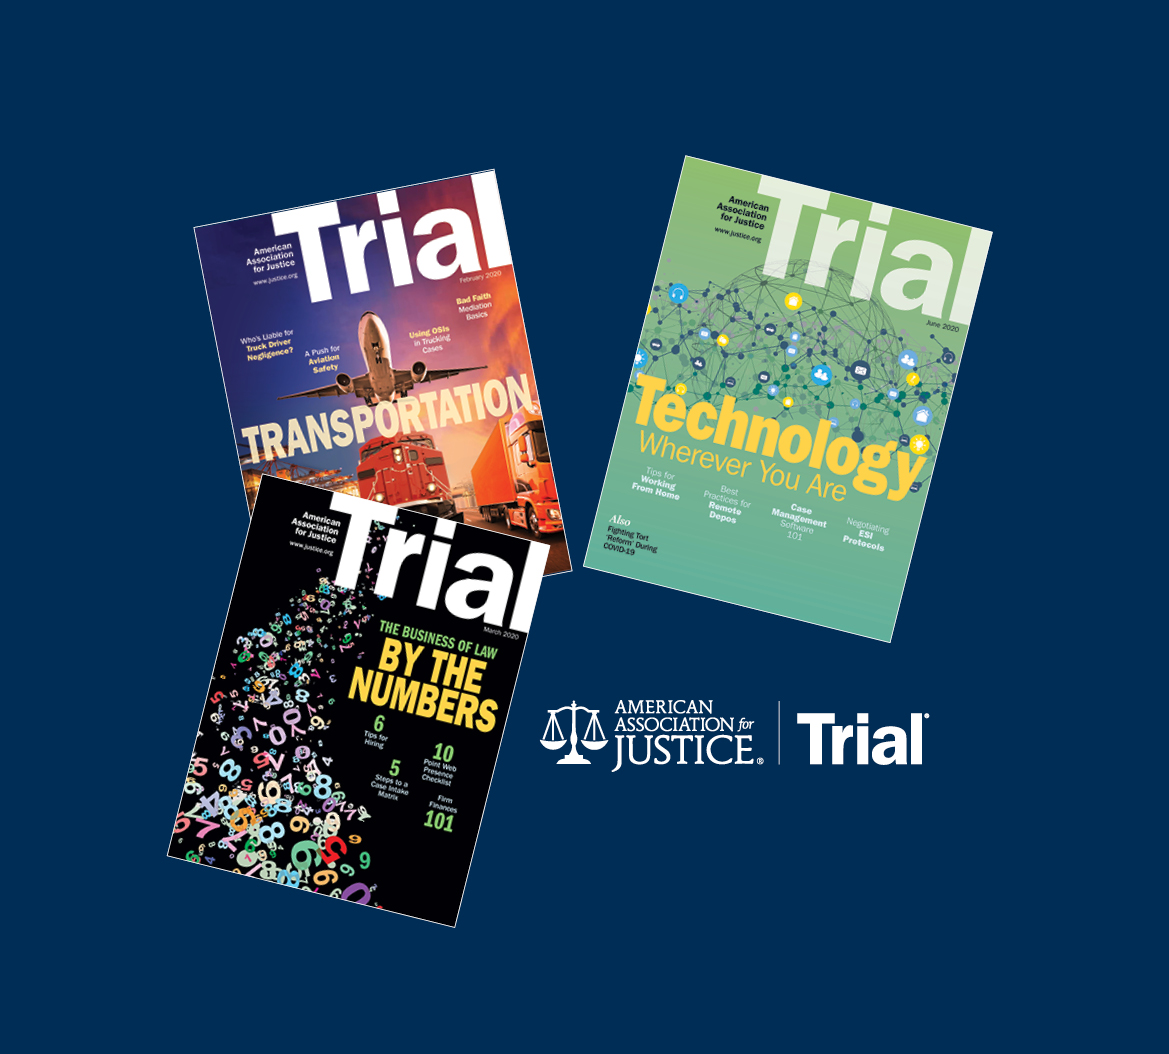 Covers of three recent issues of Trial magazine on a navy blue background.